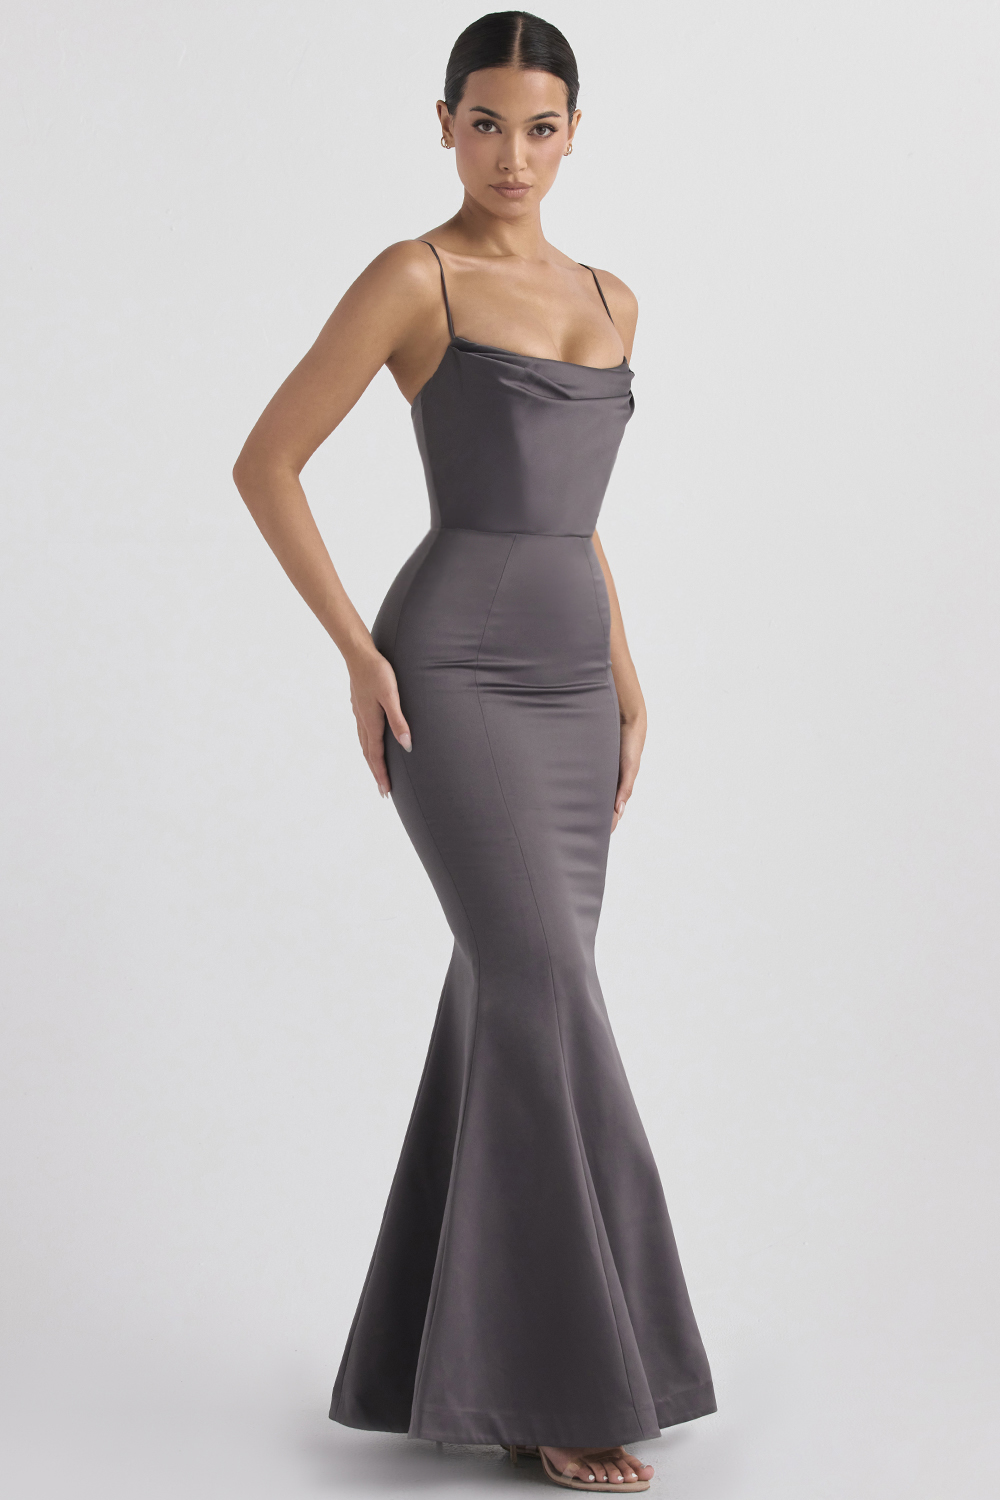 Clothing : Bridal : 'Violette' Shadow Satin Fishtail Gown